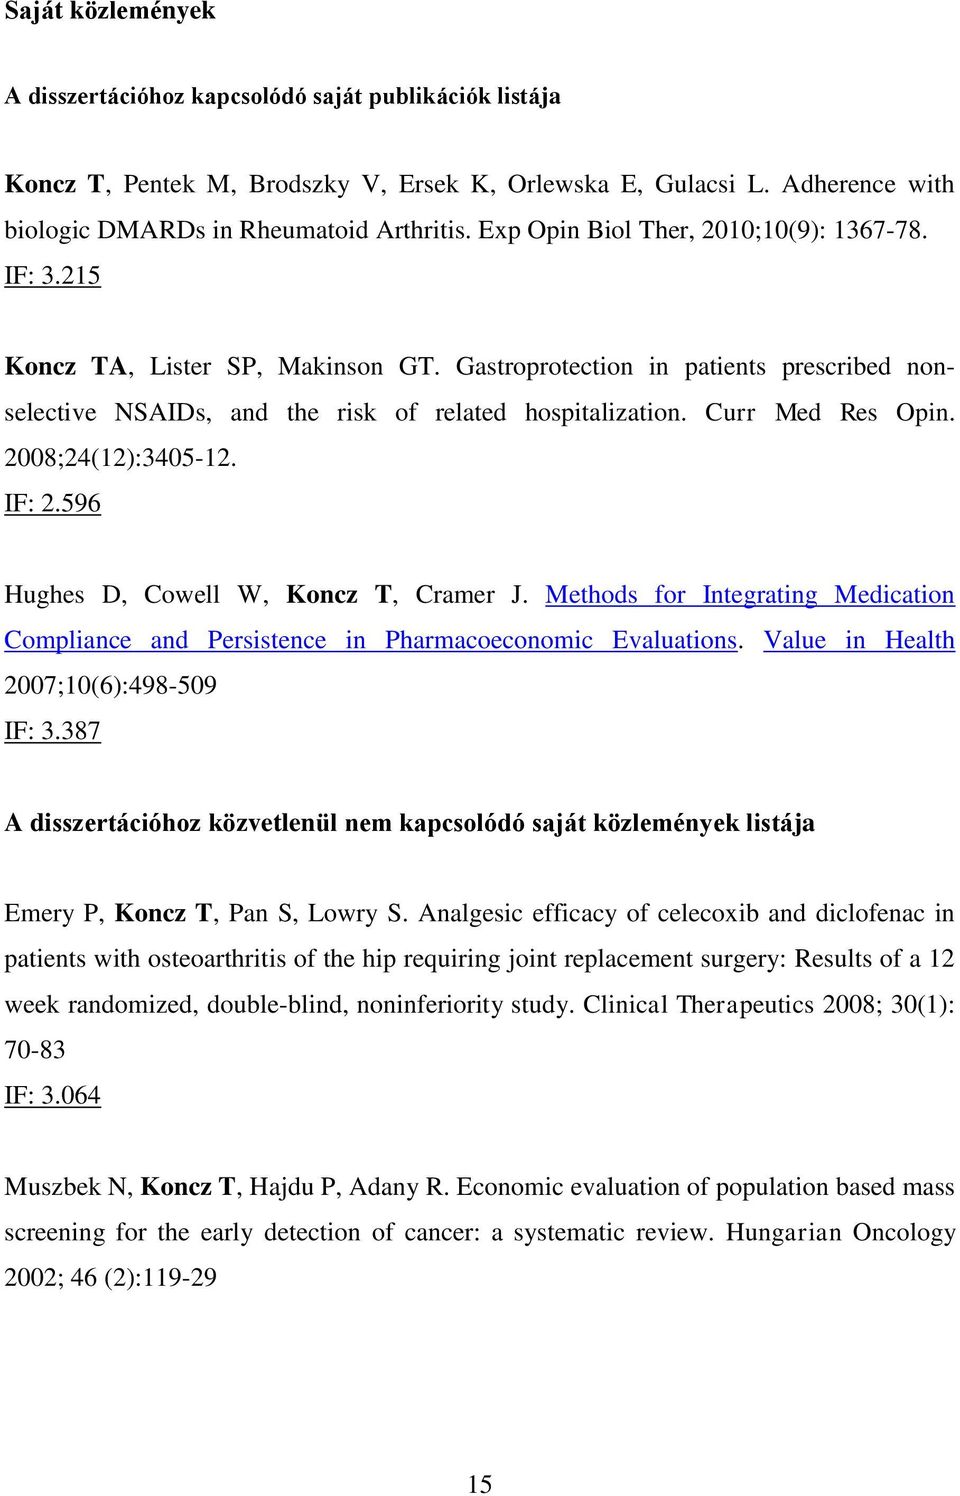 Curr Med Res Opin. 2008;24(12):3405-12. IF: 2.596 Hughes D, Cowell W, Koncz T, Cramer J. Methods for Integrating Medication Compliance and Persistence in Pharmacoeconomic Evaluations.